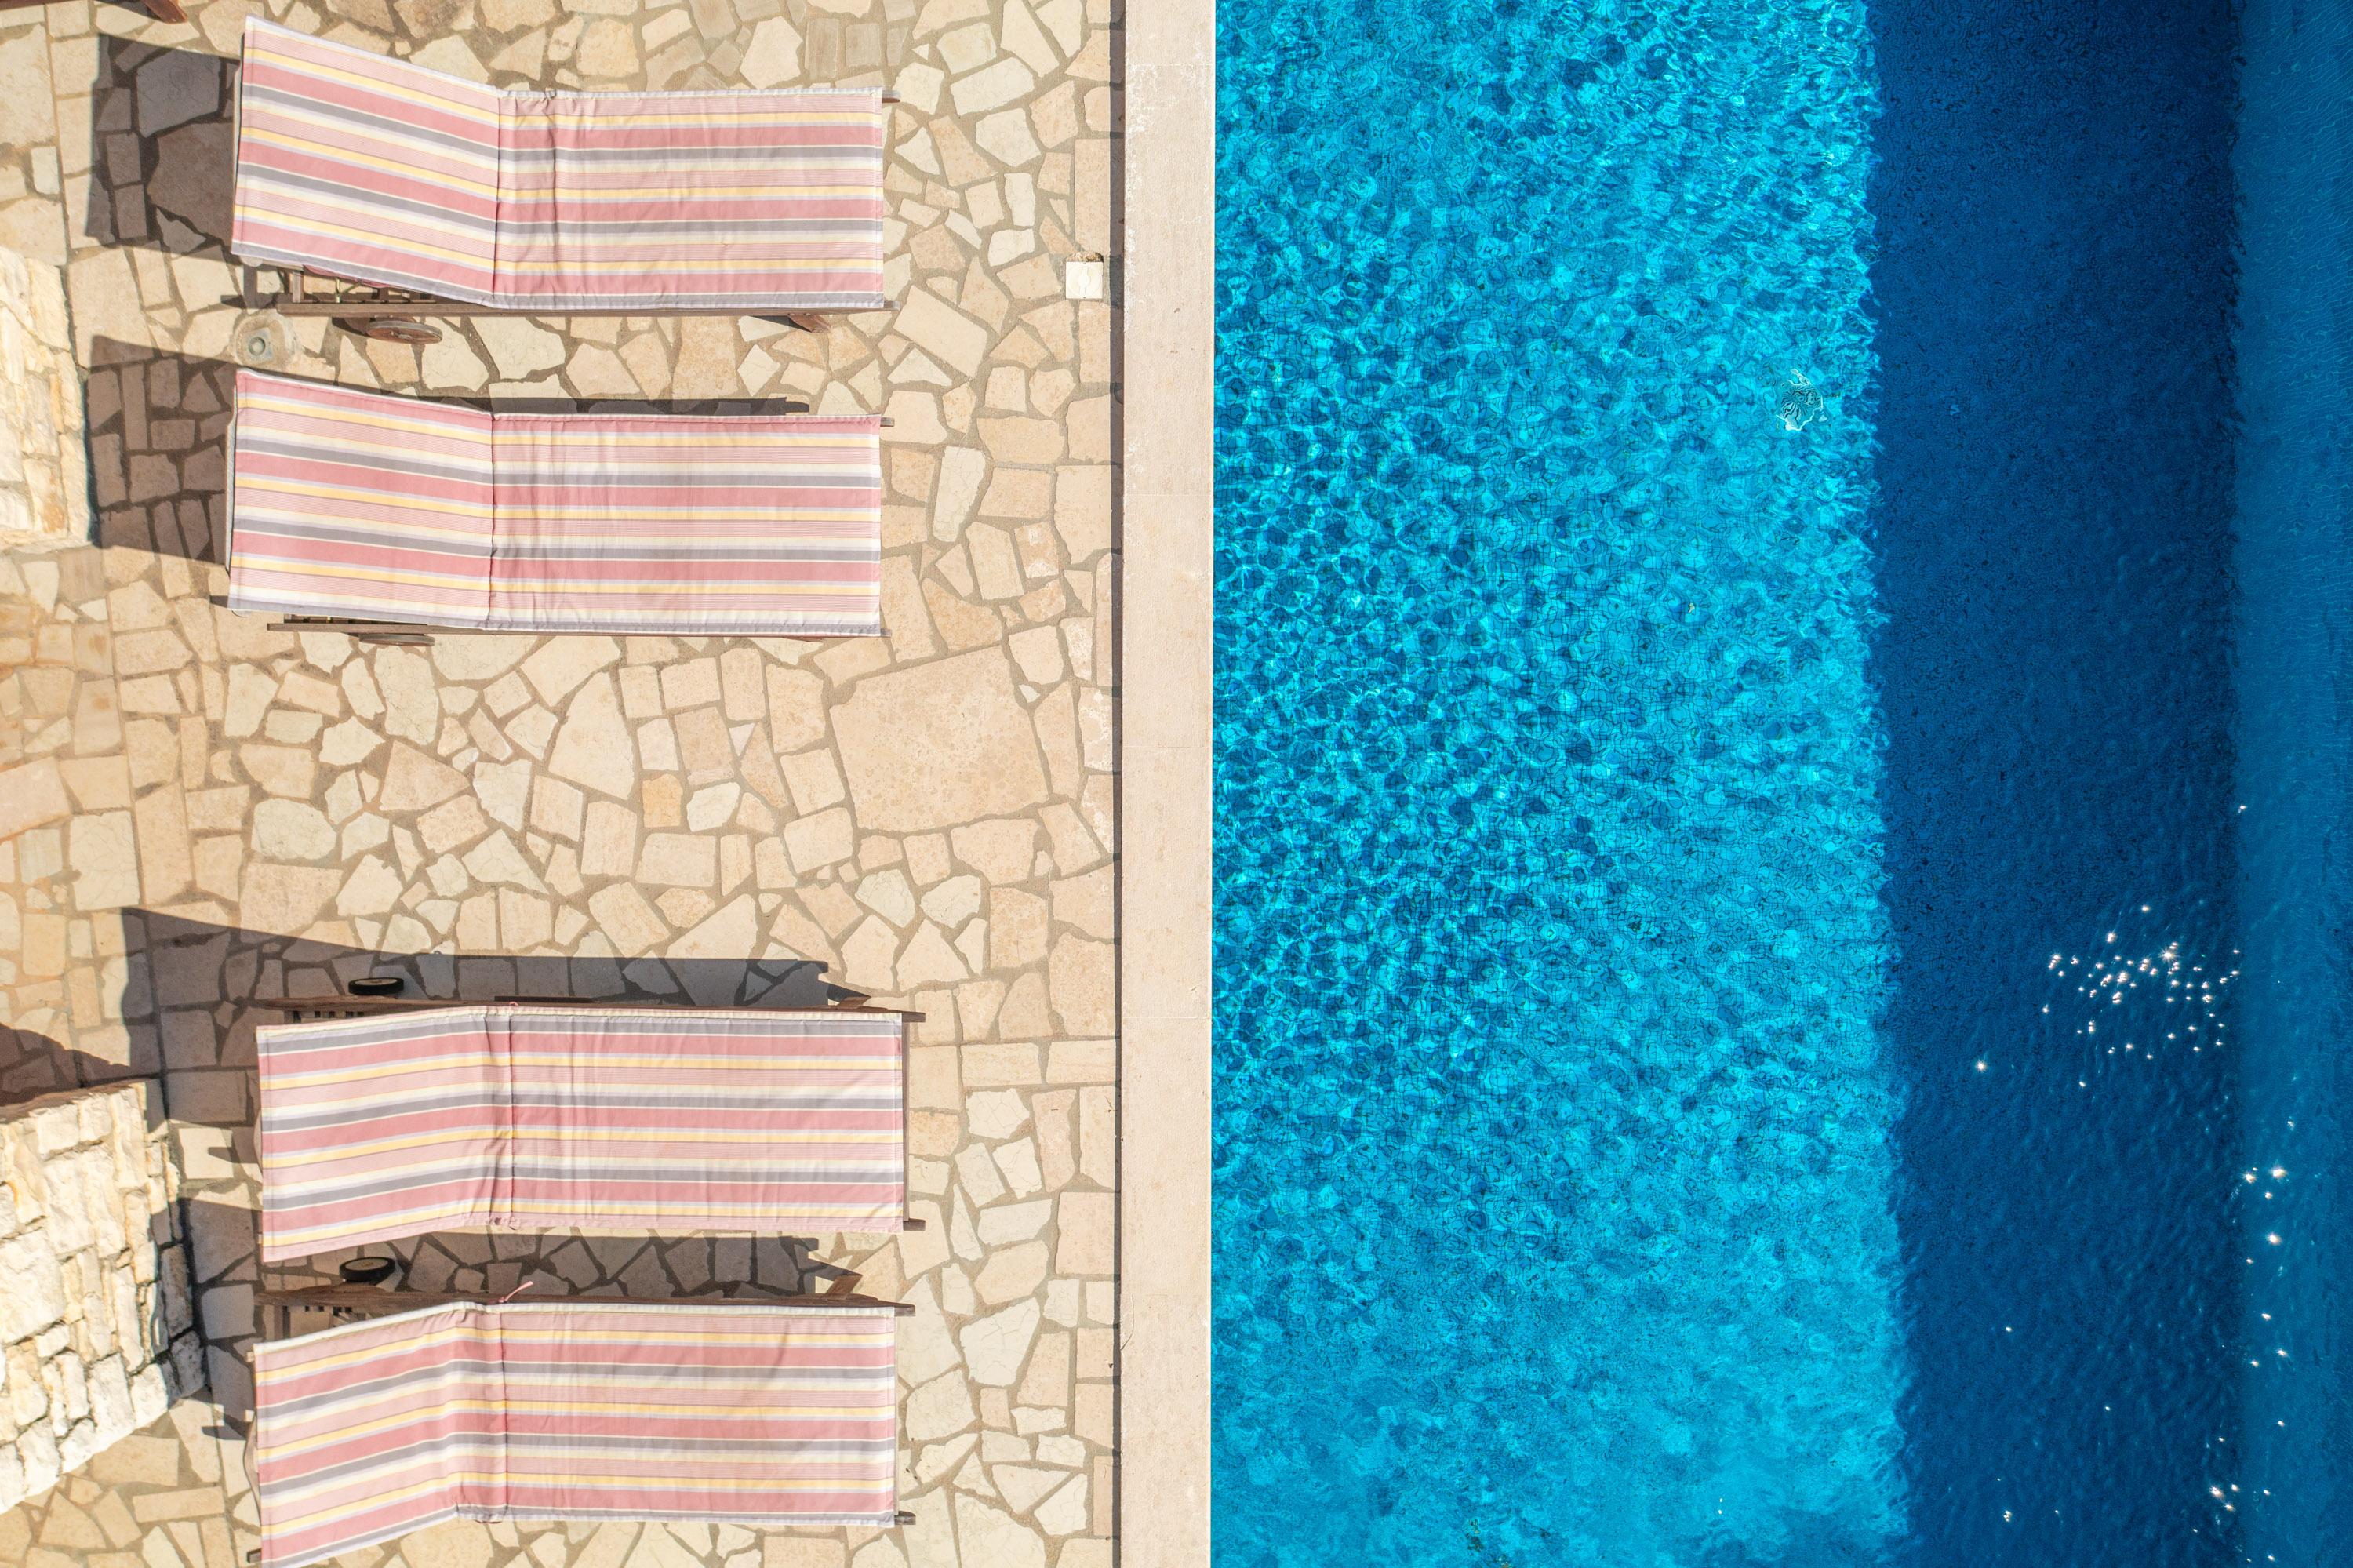 Sunbeds and pool closeup photo taken from air directly above